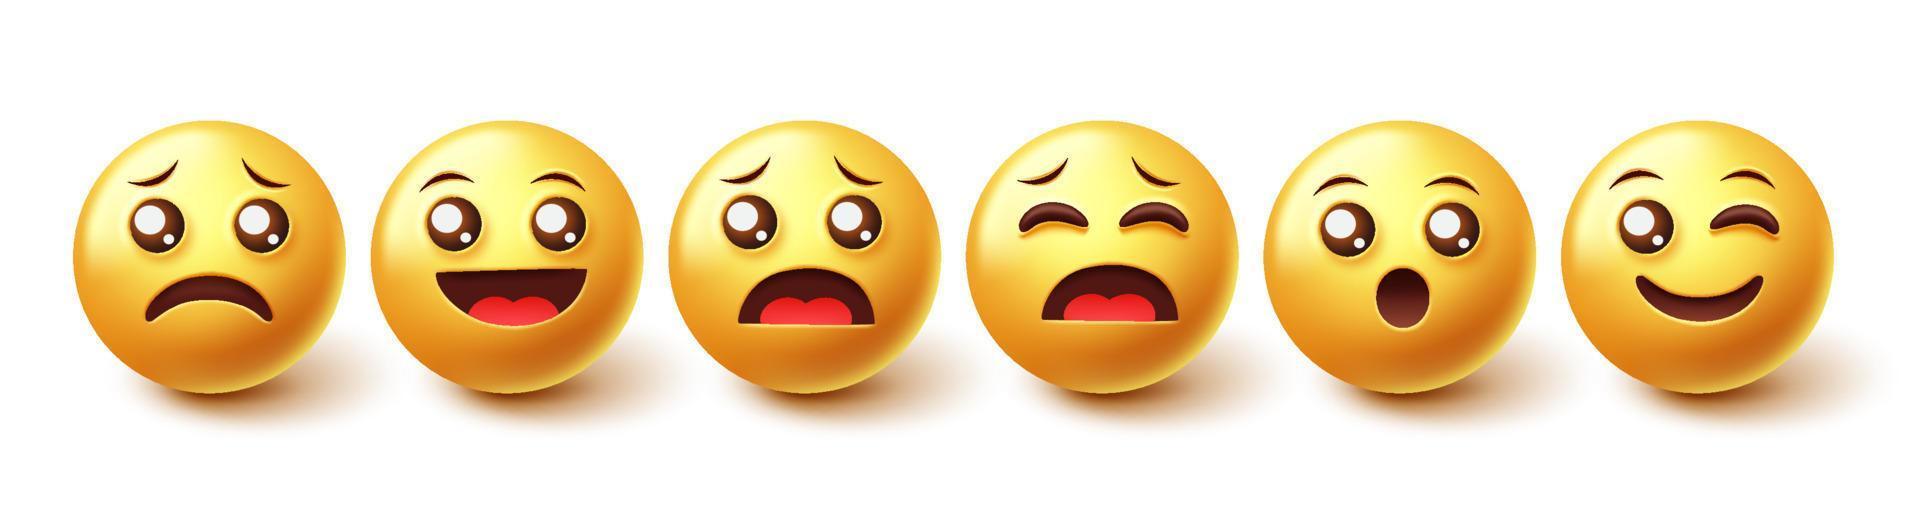 Emoji character vector set. 3d graphic emoticon design in happy, sad and surprised facial expression for emojis design collection. Vector illustration.